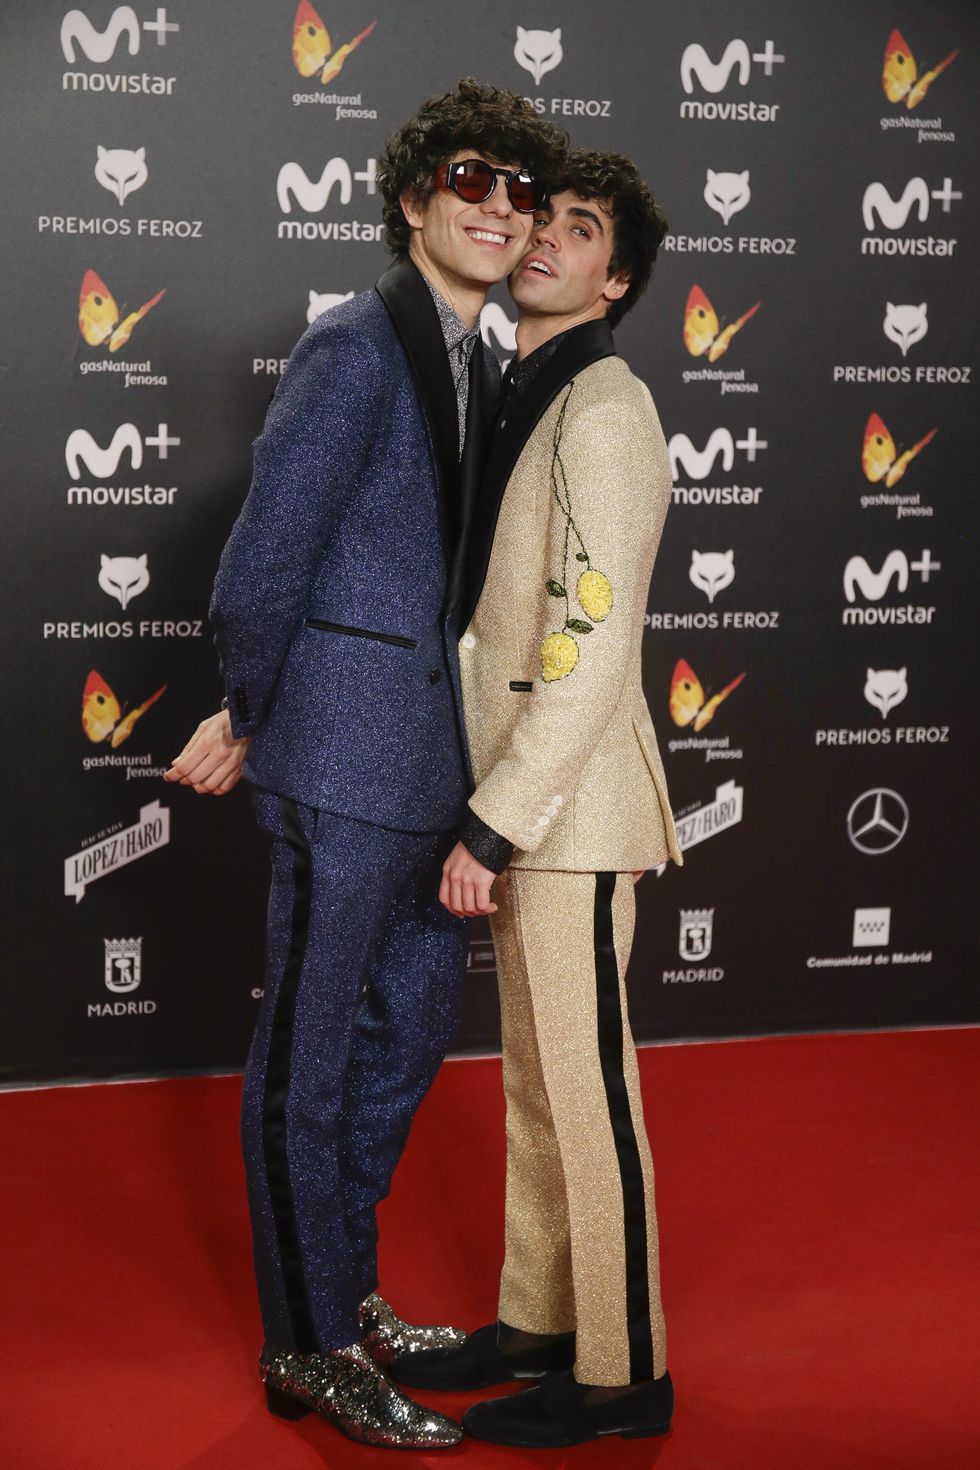 Actors Javier Calvo and Javier Ambrossi at the 5th annual Feroz Awards on Monday, Jan. 22, 2018, in Madrid